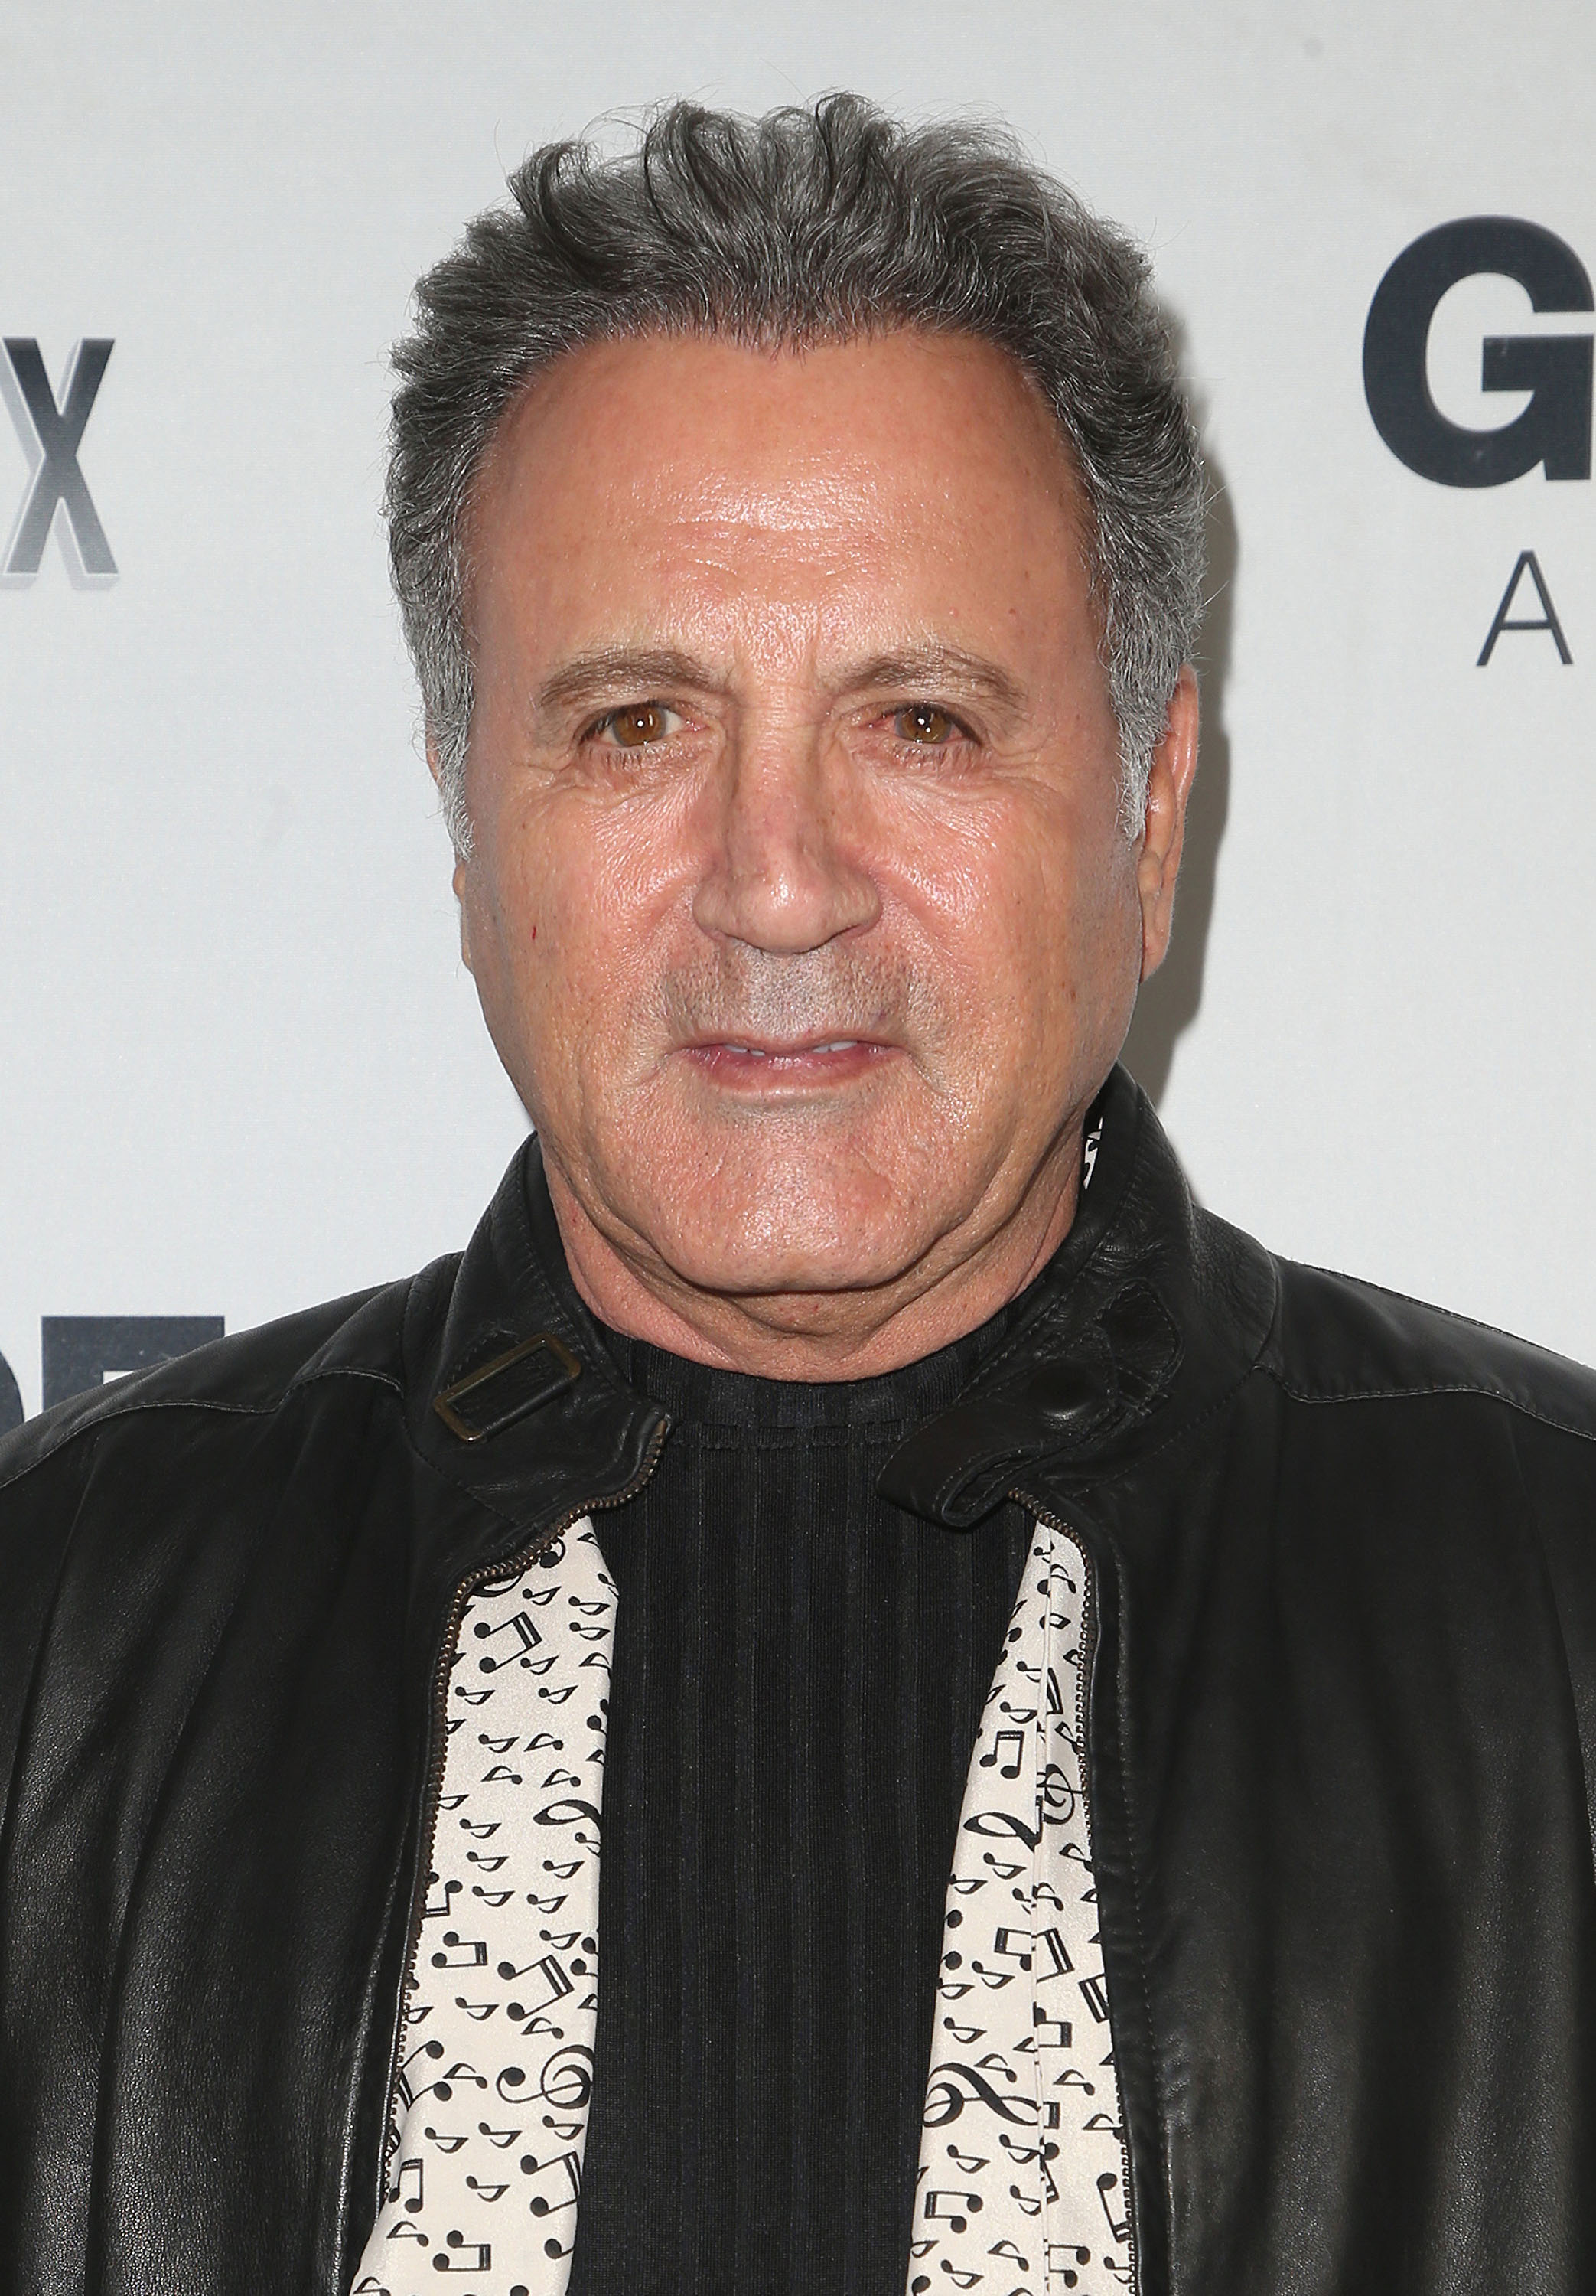 Frank Stallone is Sylvester's only full biological brother